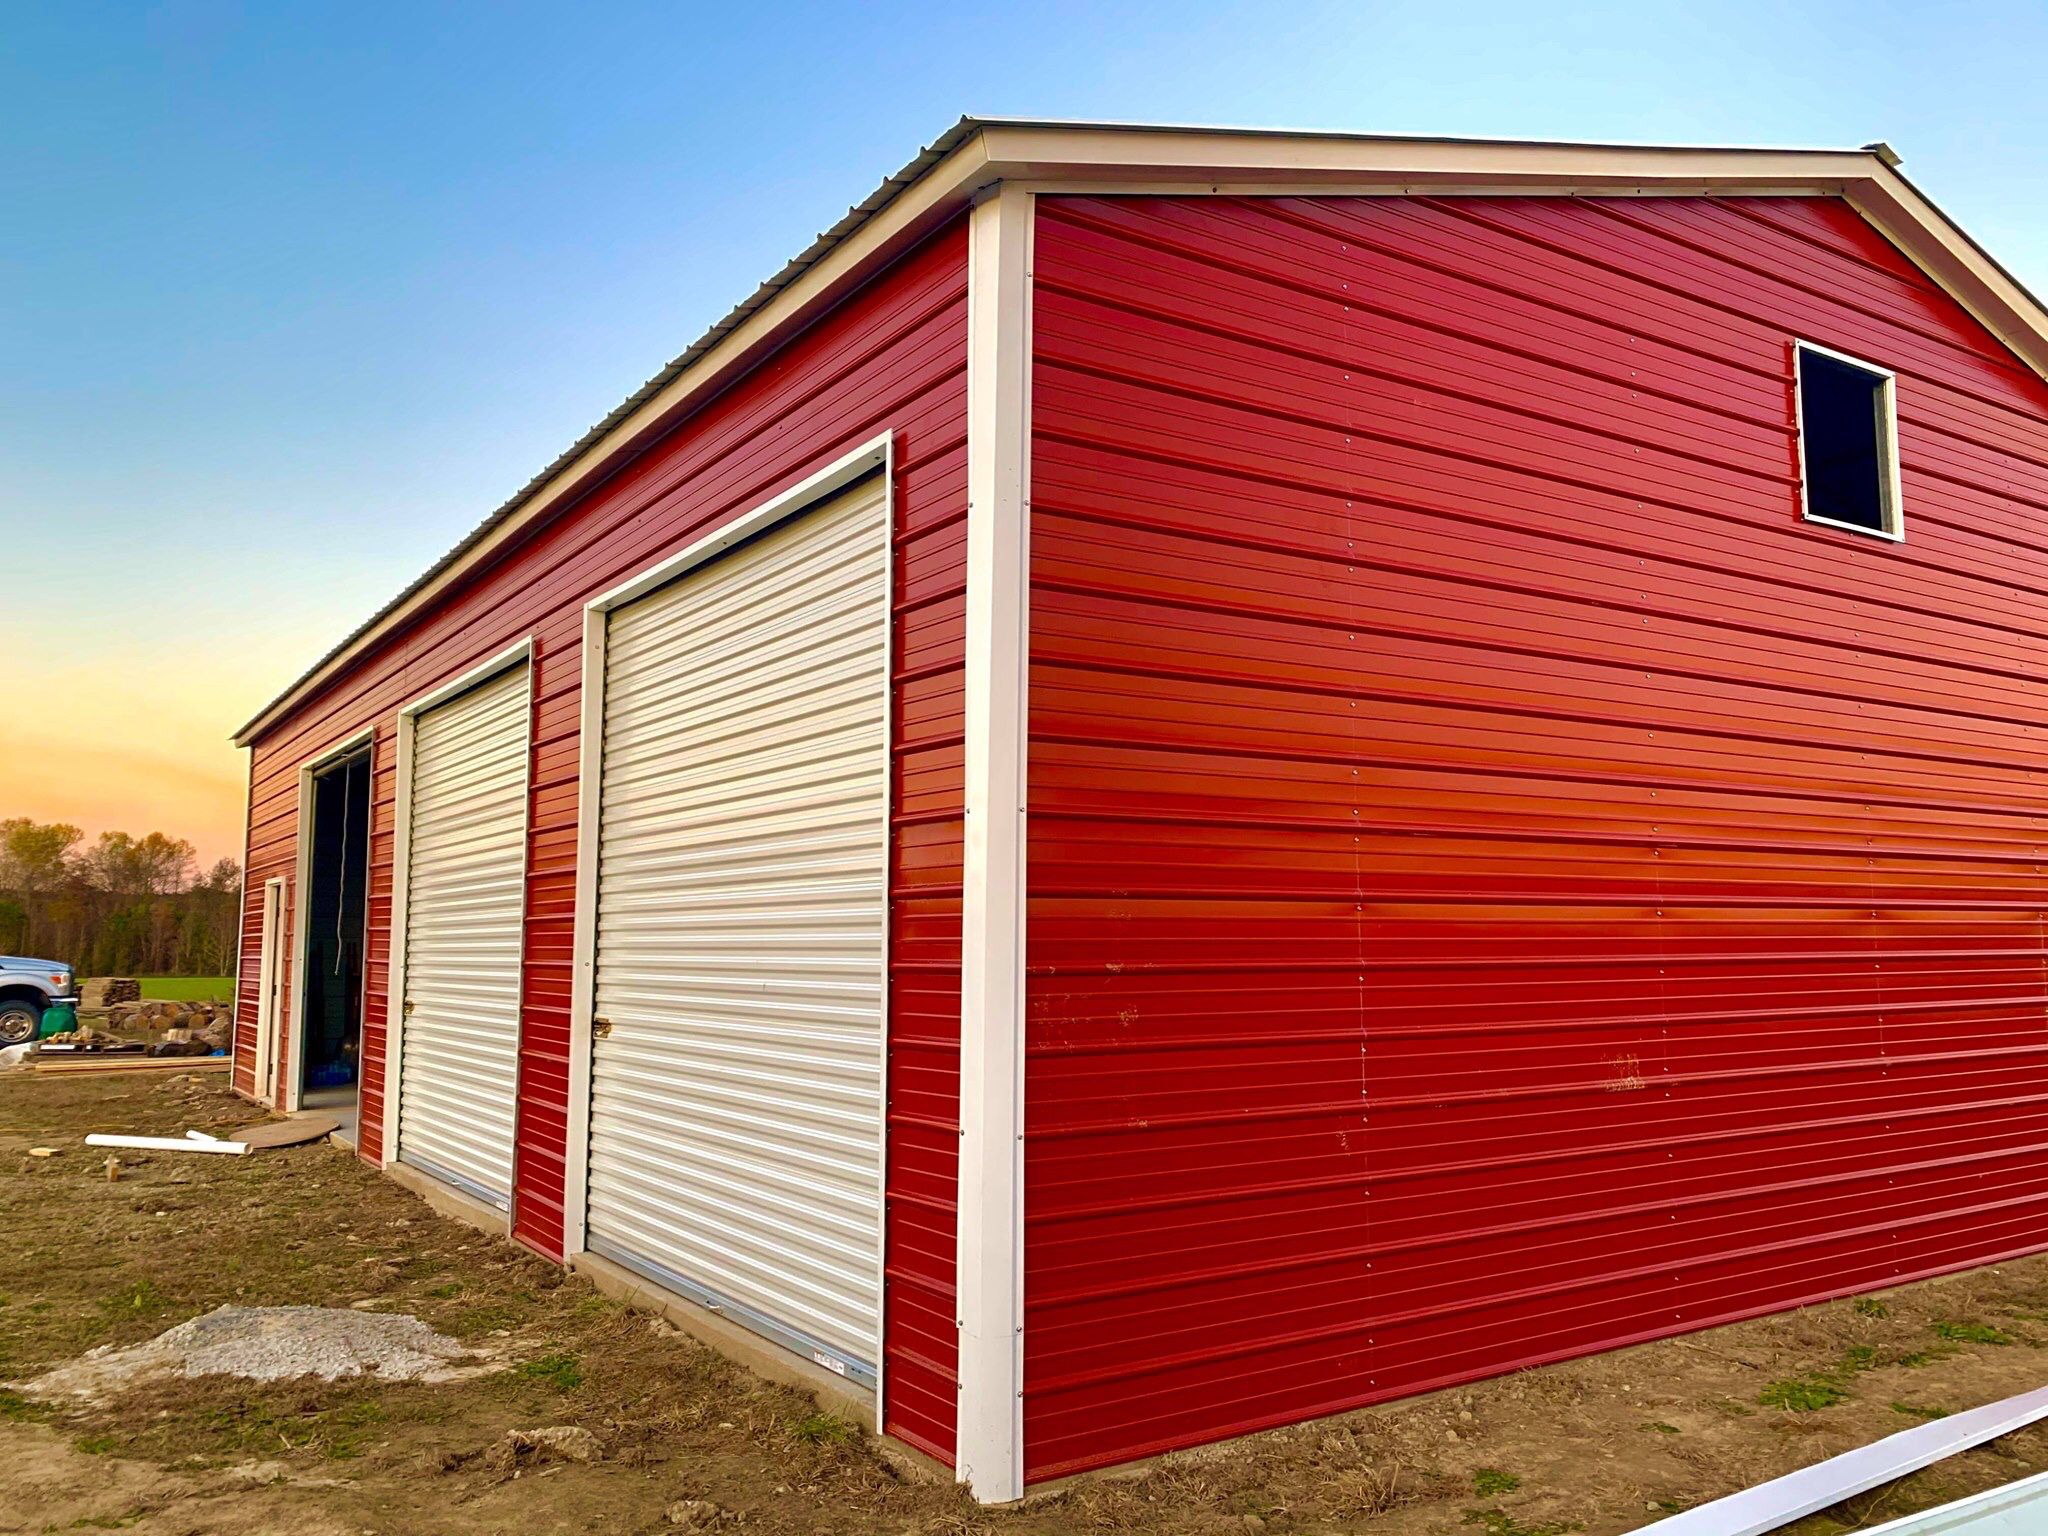 Why should I choose color-coated steel for buildings